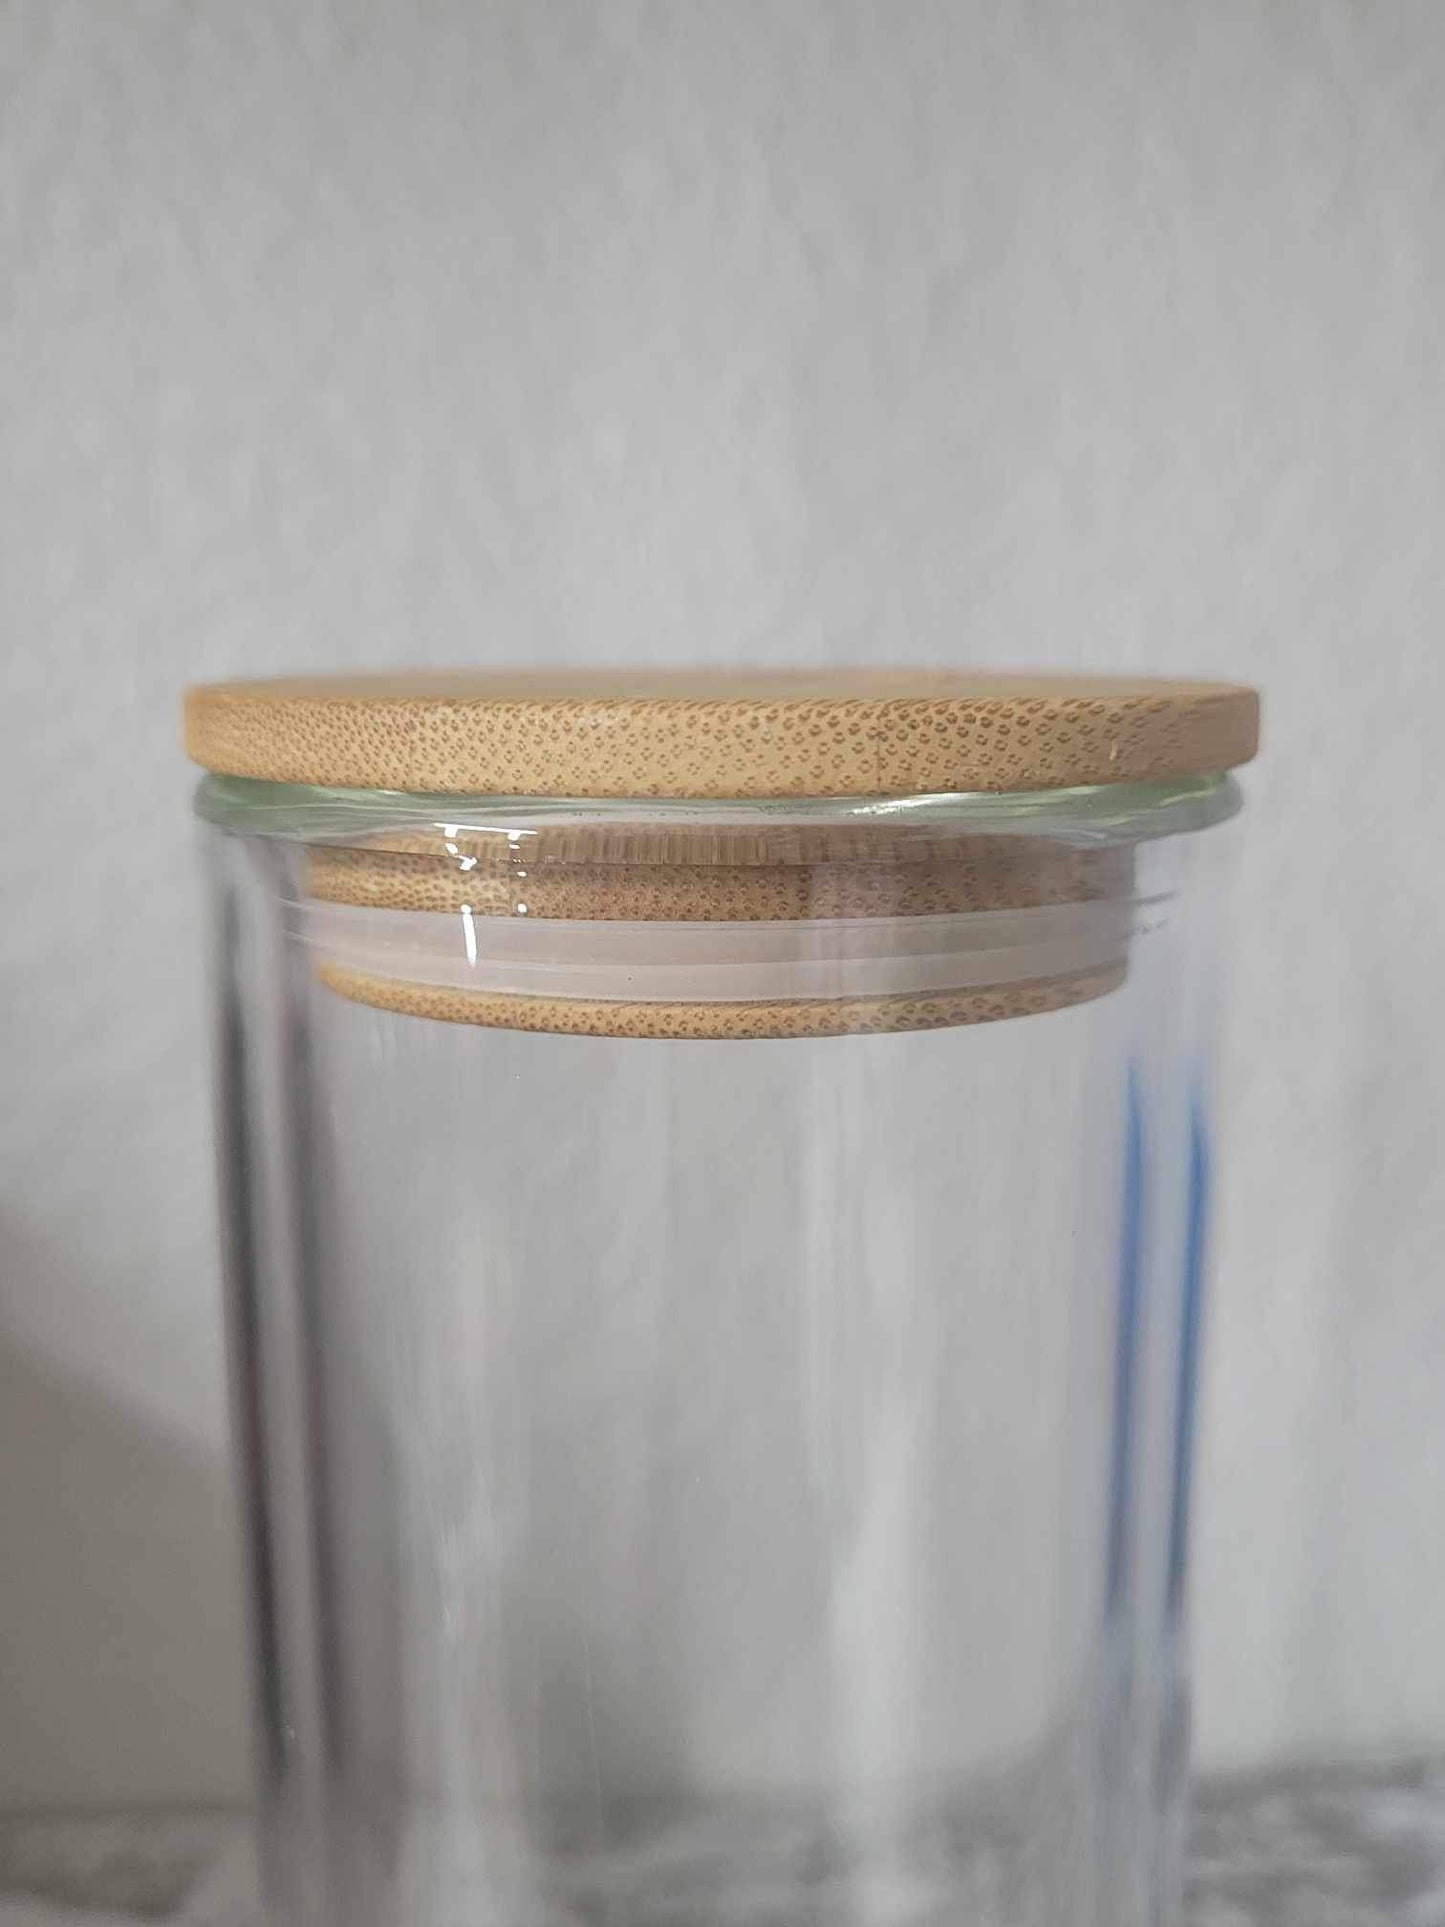 16oz/20oz/25oz, Blank GLASS double wall snowglobe tumbler, Pre-drilled bottom hole.  Bamboo lid and straw.  Ships from the USA